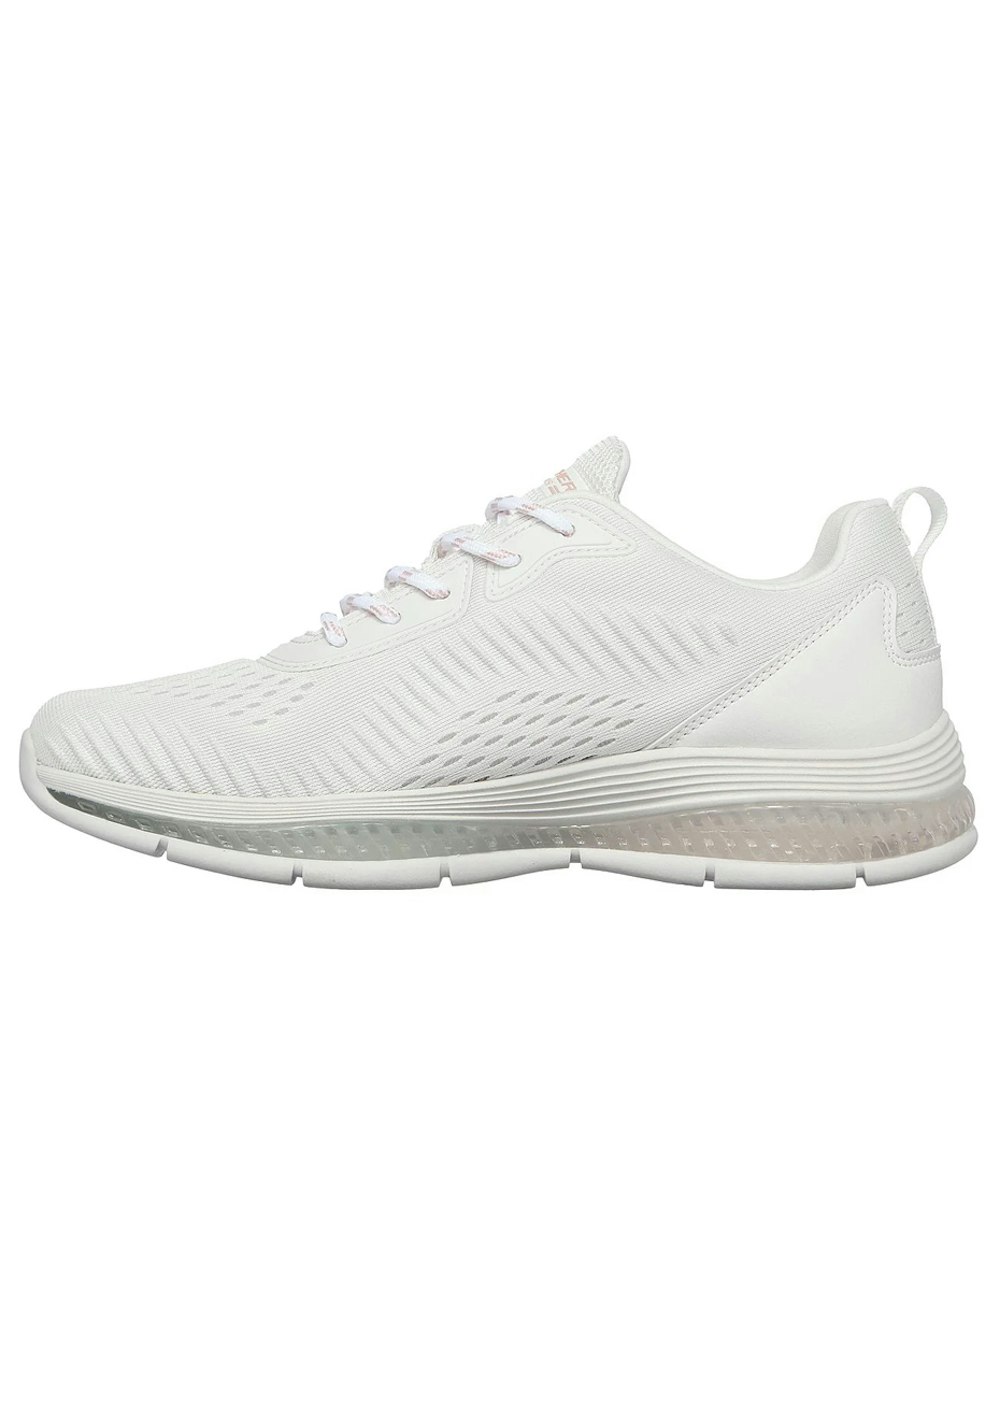 Skechers - Womens Bobs Gamma - White - Onceit